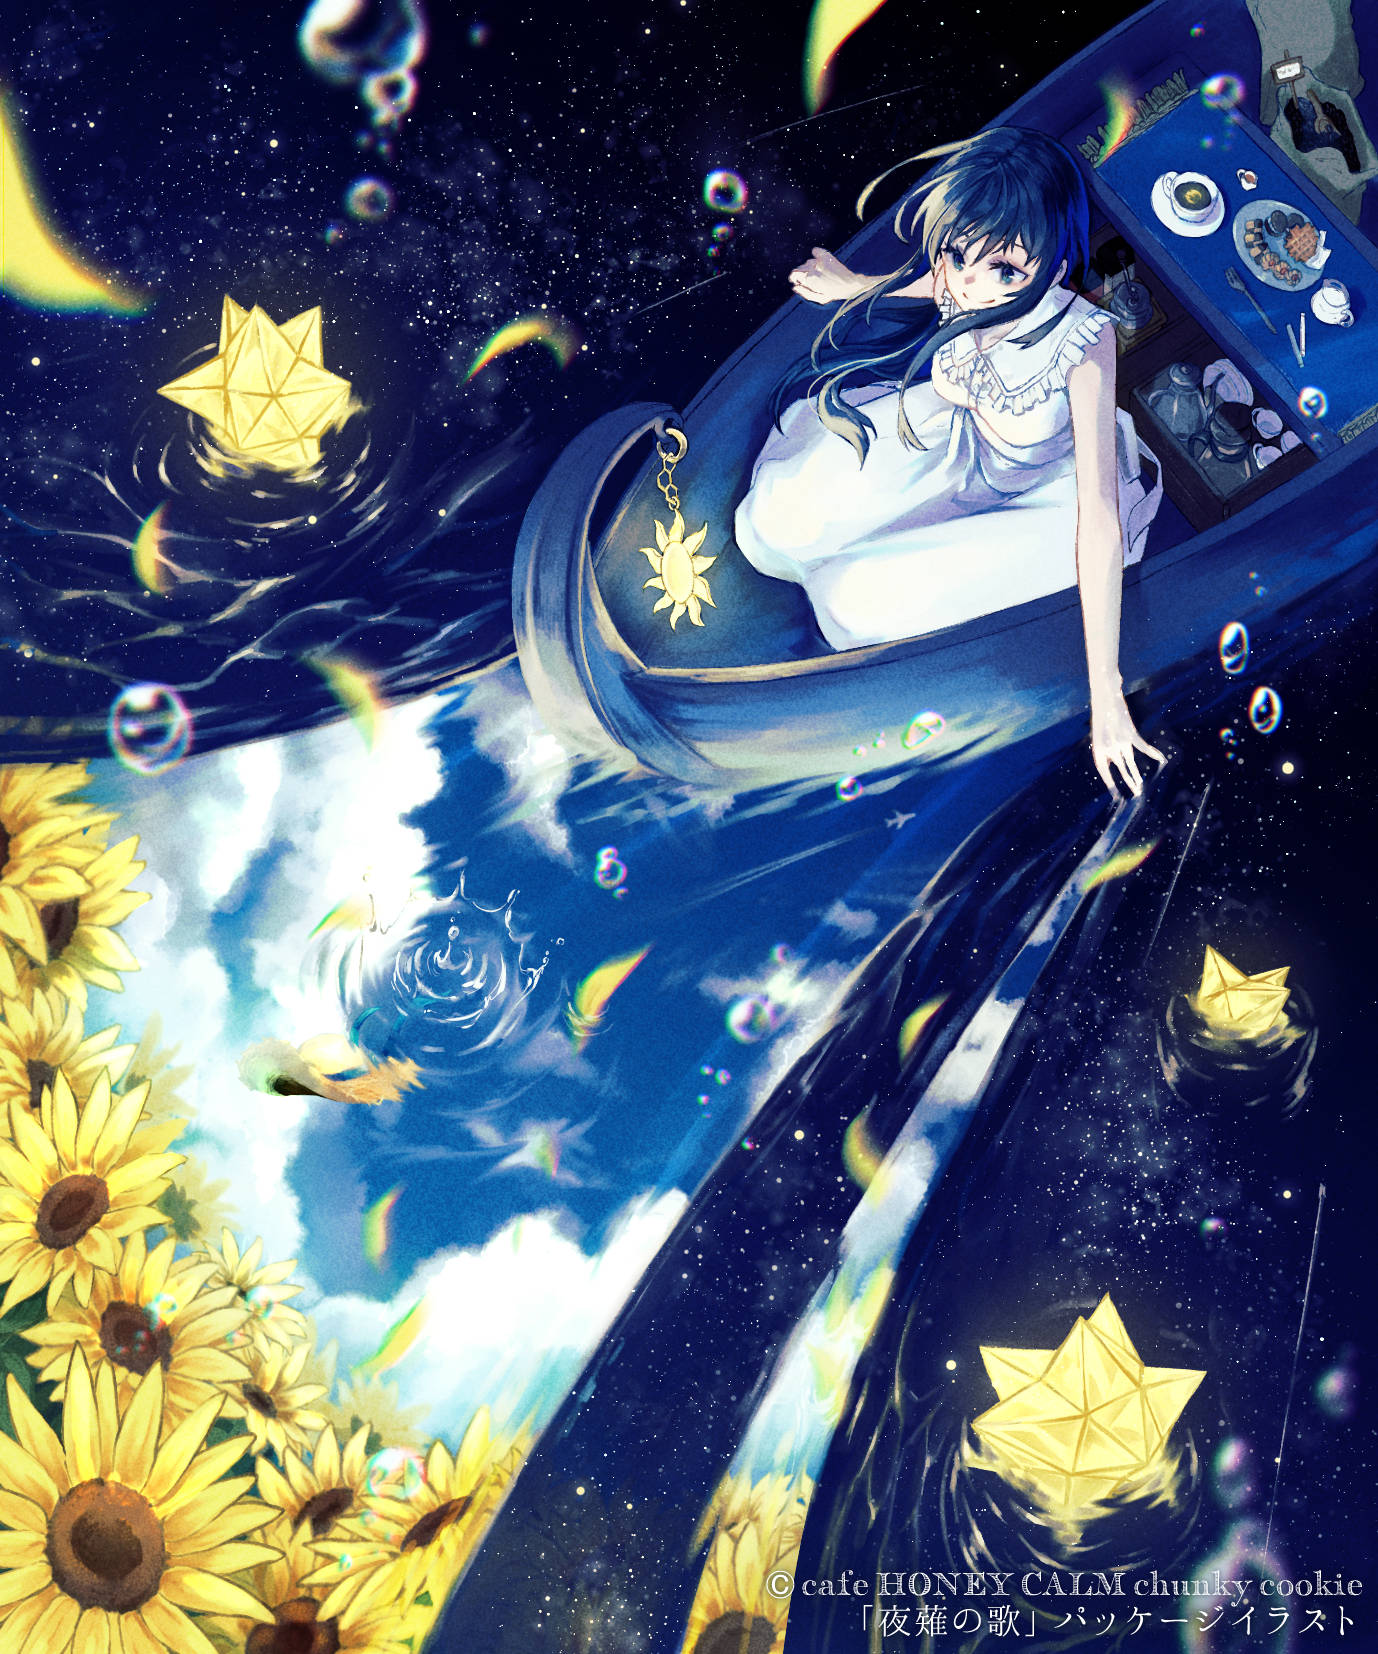 Anime 1378x1654 portrait display sunflowers starry night starred sky white dress water drops bubbles watermarked boat stars water night petals clouds sleeveless Canned Rose dress sky sitting